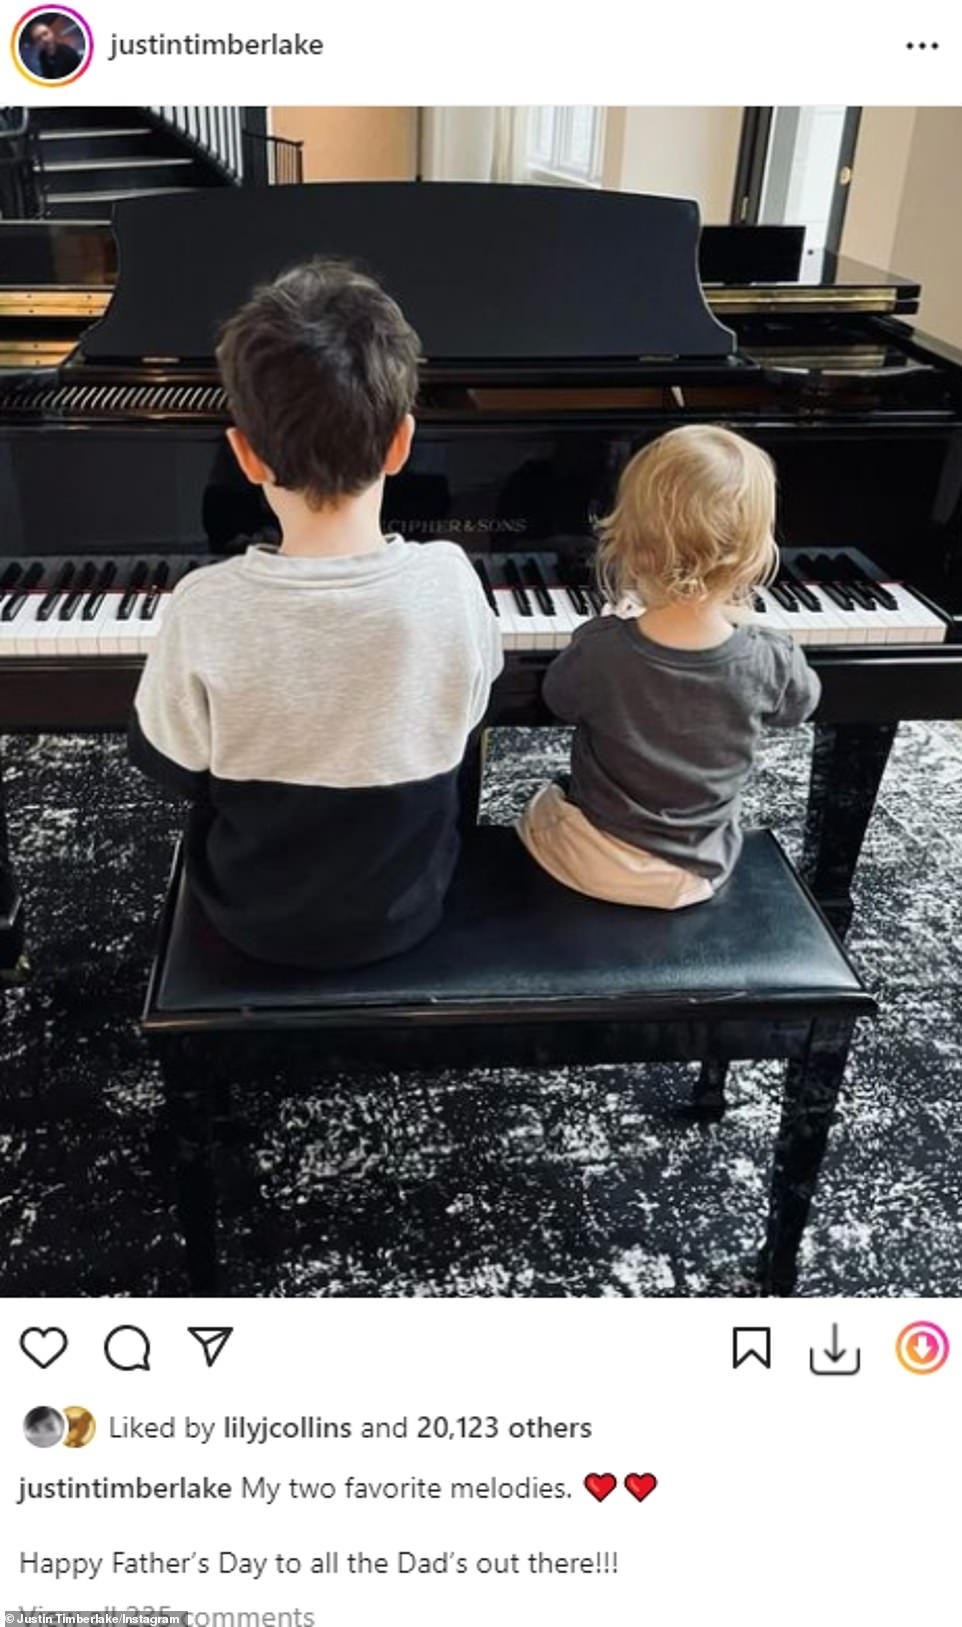 'My two favorite tunes': Justin Timberlake shared a precious snap of his sons Silas, seven, and Phineas, one, playing the piano